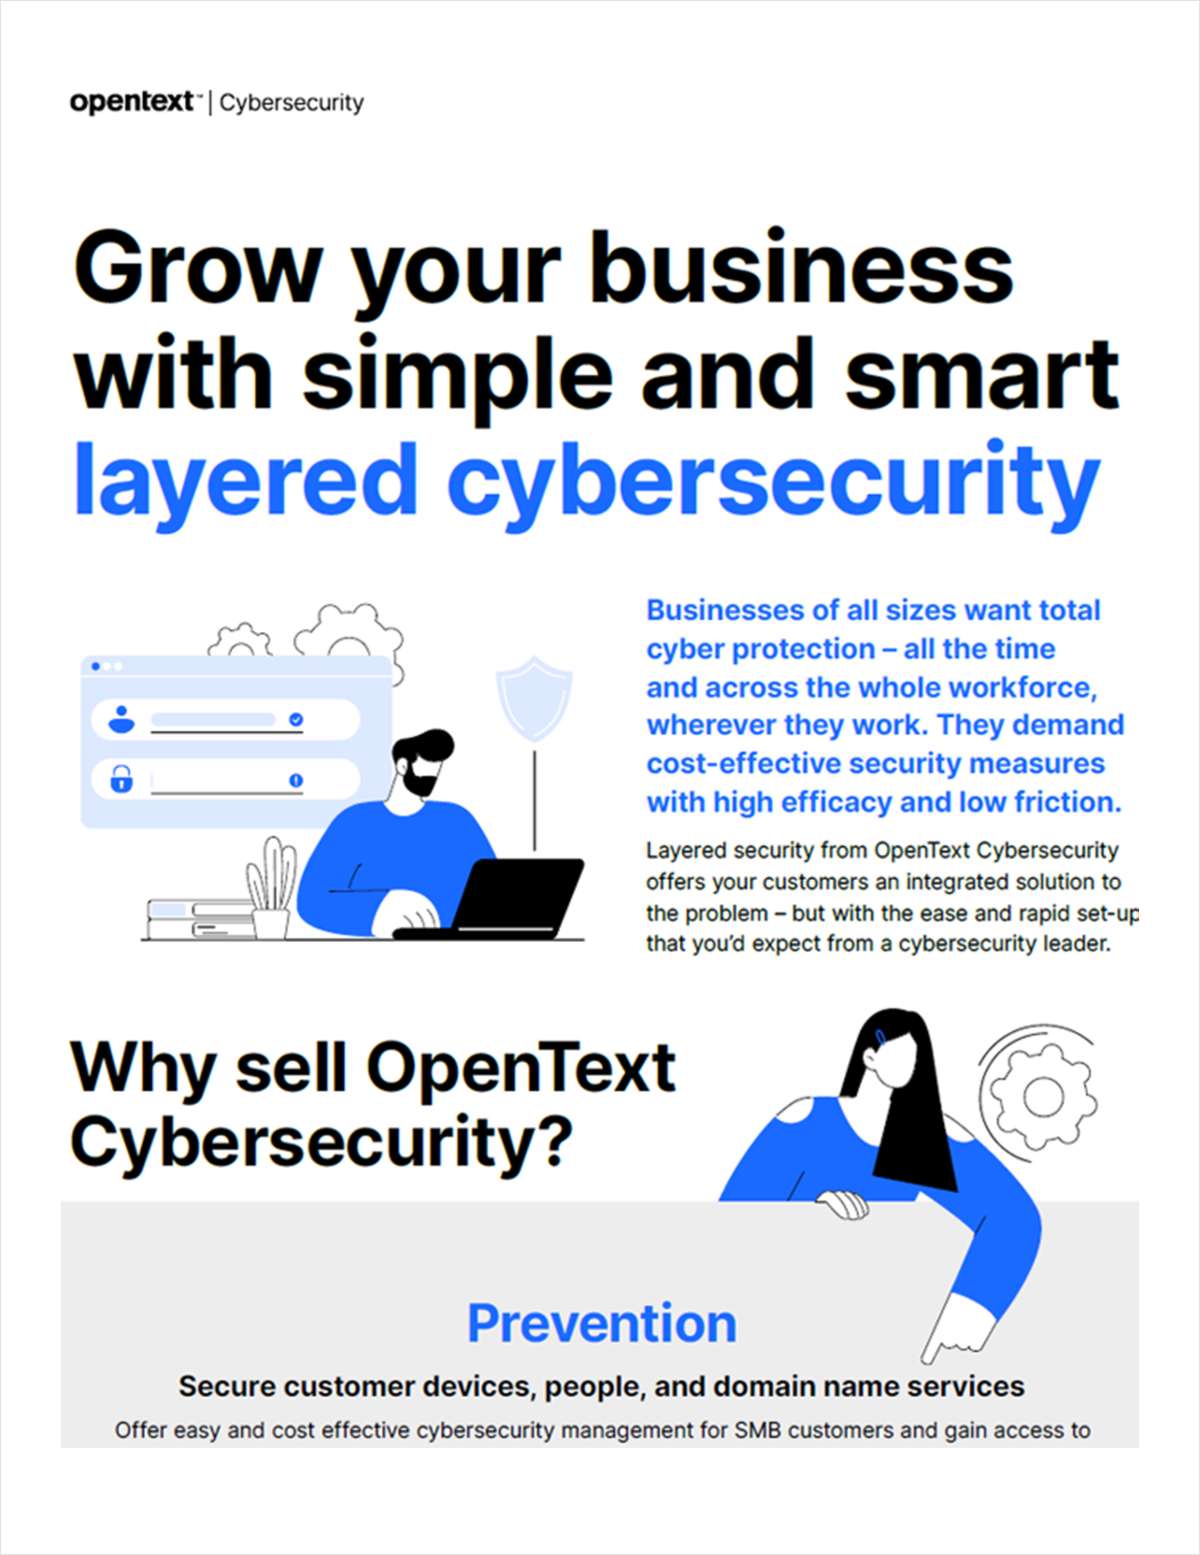 Grow your business with simple and smart layered cybersecurity